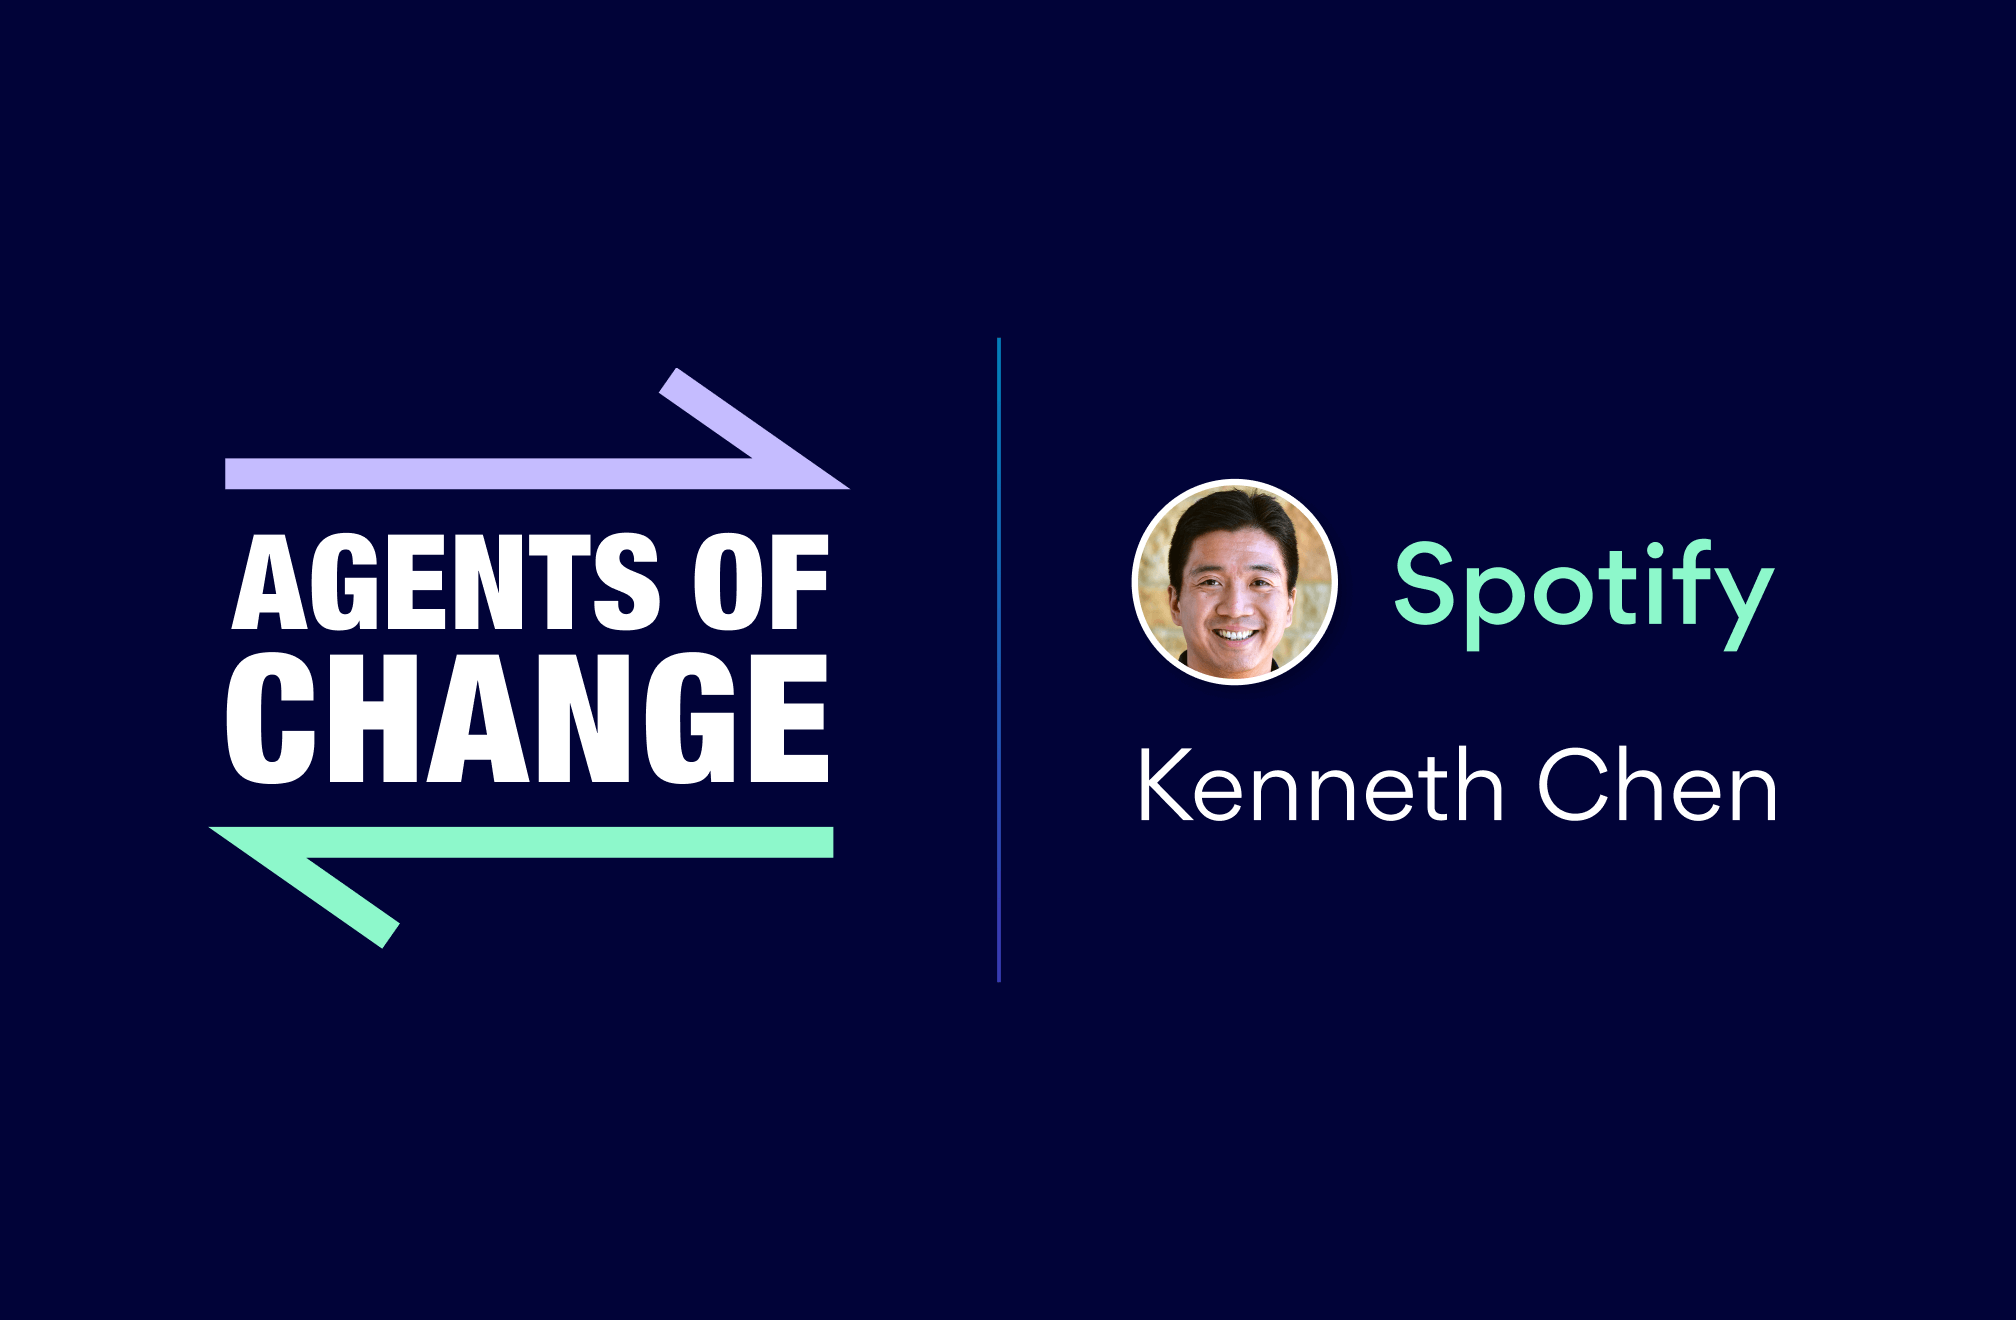 Agents of Change: Kenneth Chen of Spotify